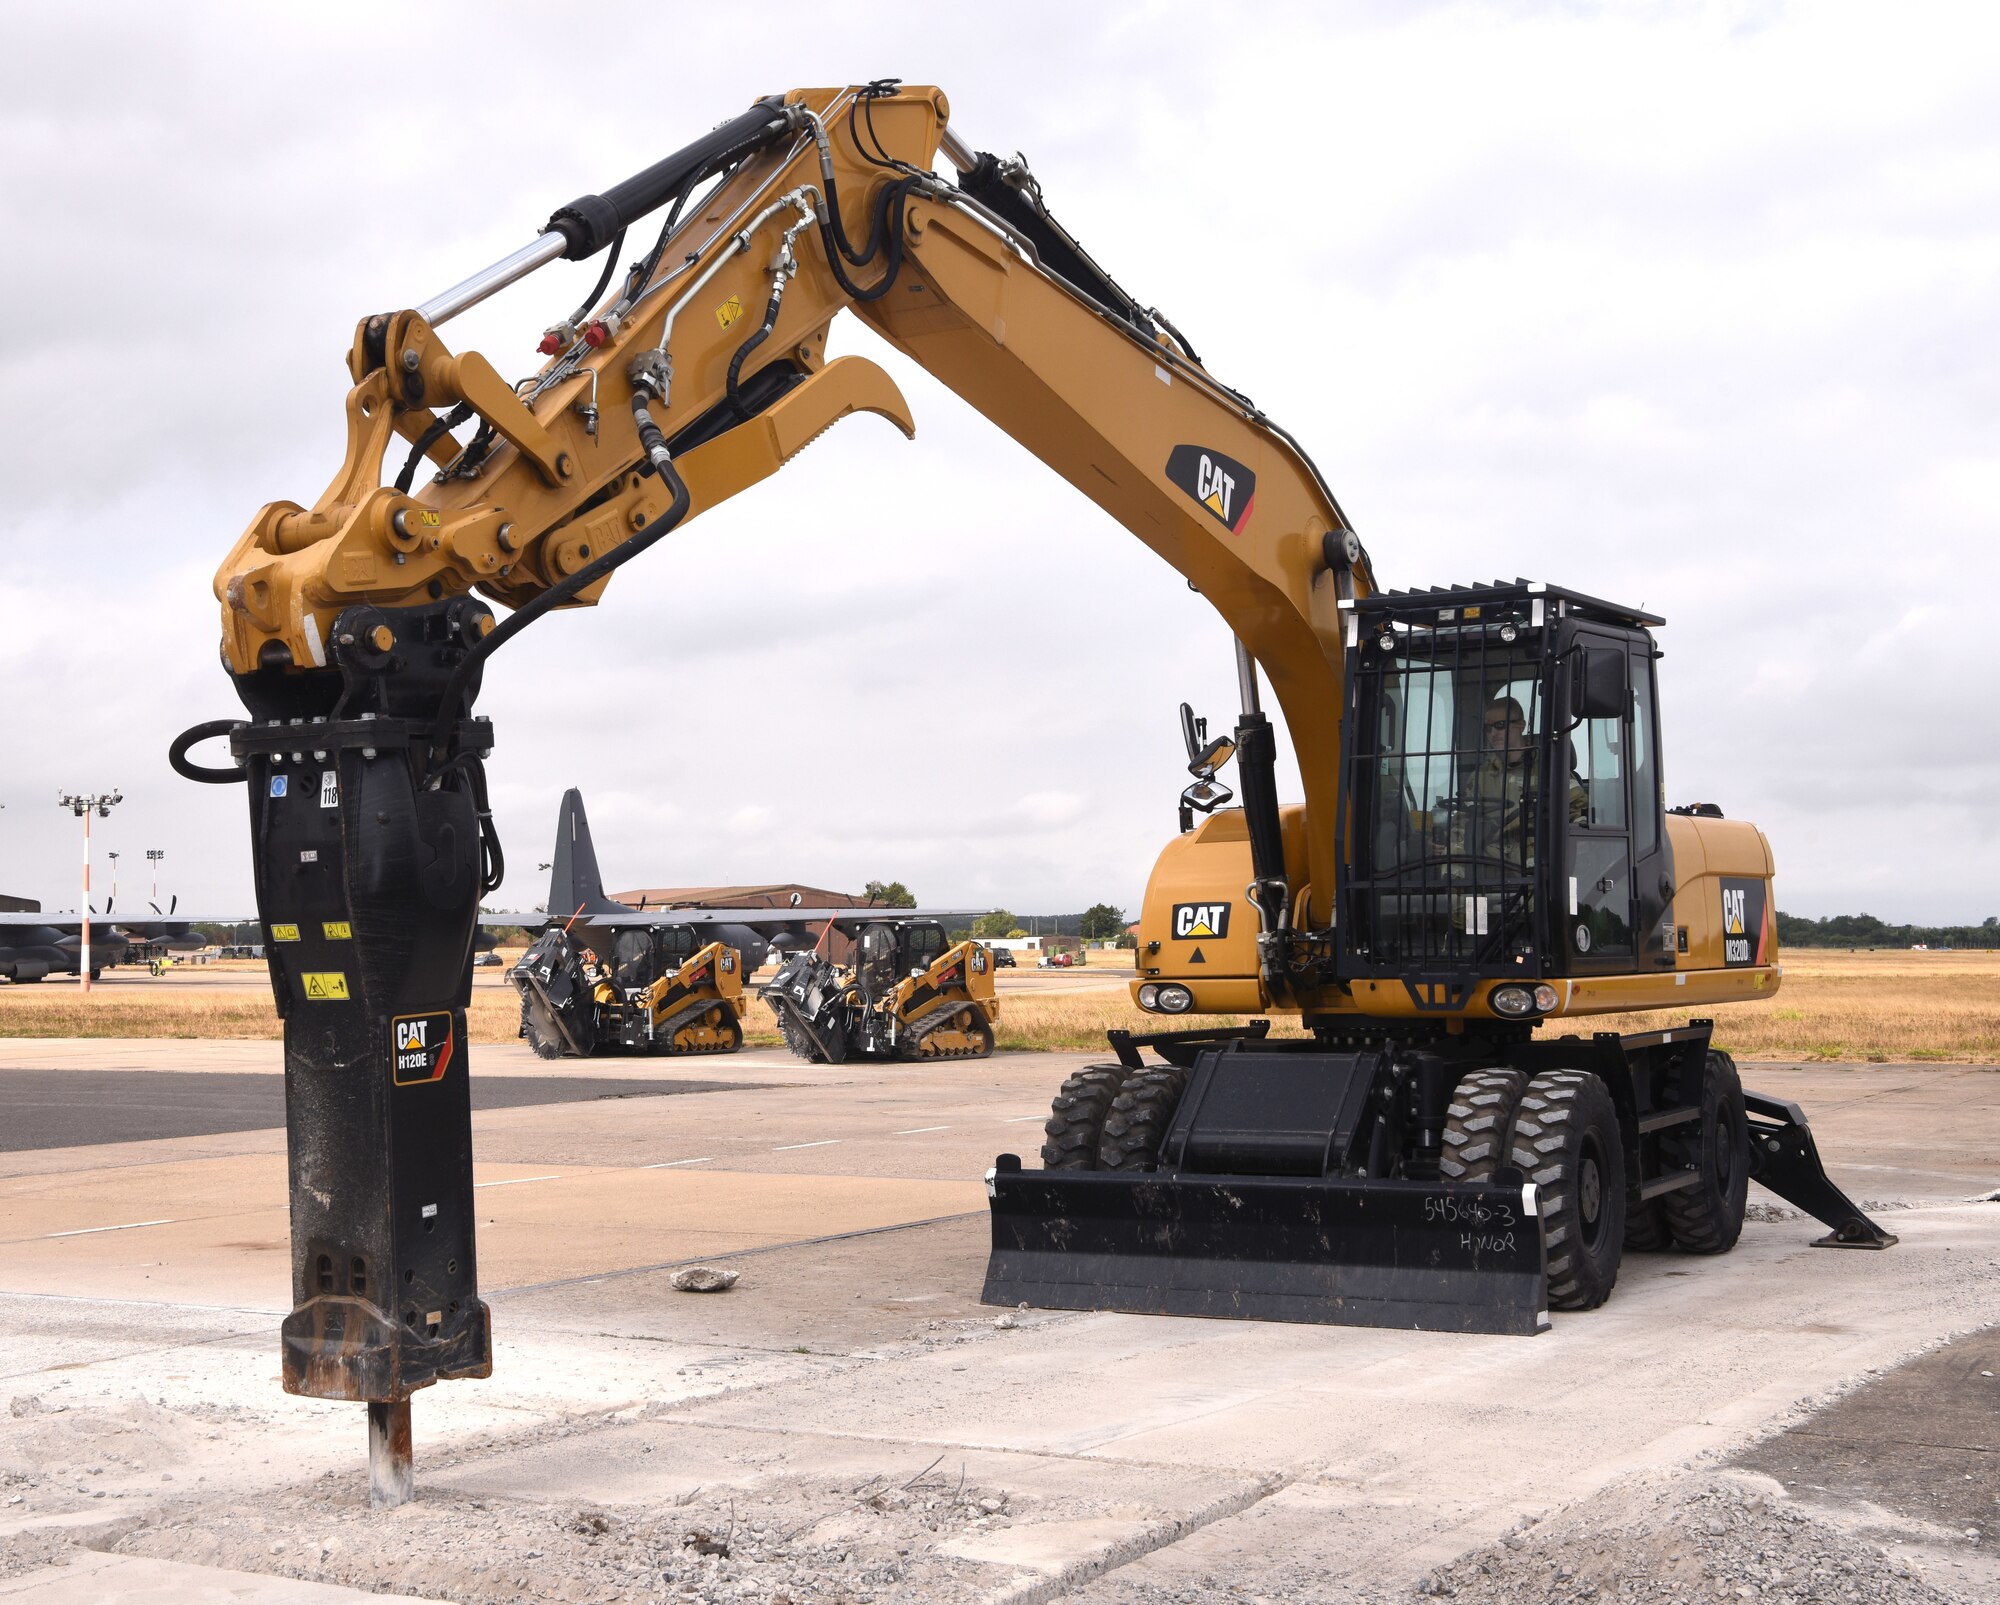 A U.S. Air Force 100th Civil Engineer Squadron Airman uses an excavator with a jackhammer to break up concrete during a simulated runway repair as part of a chemical, biological, radiological, nuclear and explosives exercise at Royal Air Force Mildenhall, England, Aug. 17, 2022. The Airmen used a variety of equipment including excavators and loaders to practice removing damaged concrete and base course on a simulated runway. They practiced repair, break up and removal of concrete, before mixing and pouring new, quick-drying concrete and levelling it. (U.S. Air Force photo by Karen Abeyasekere)